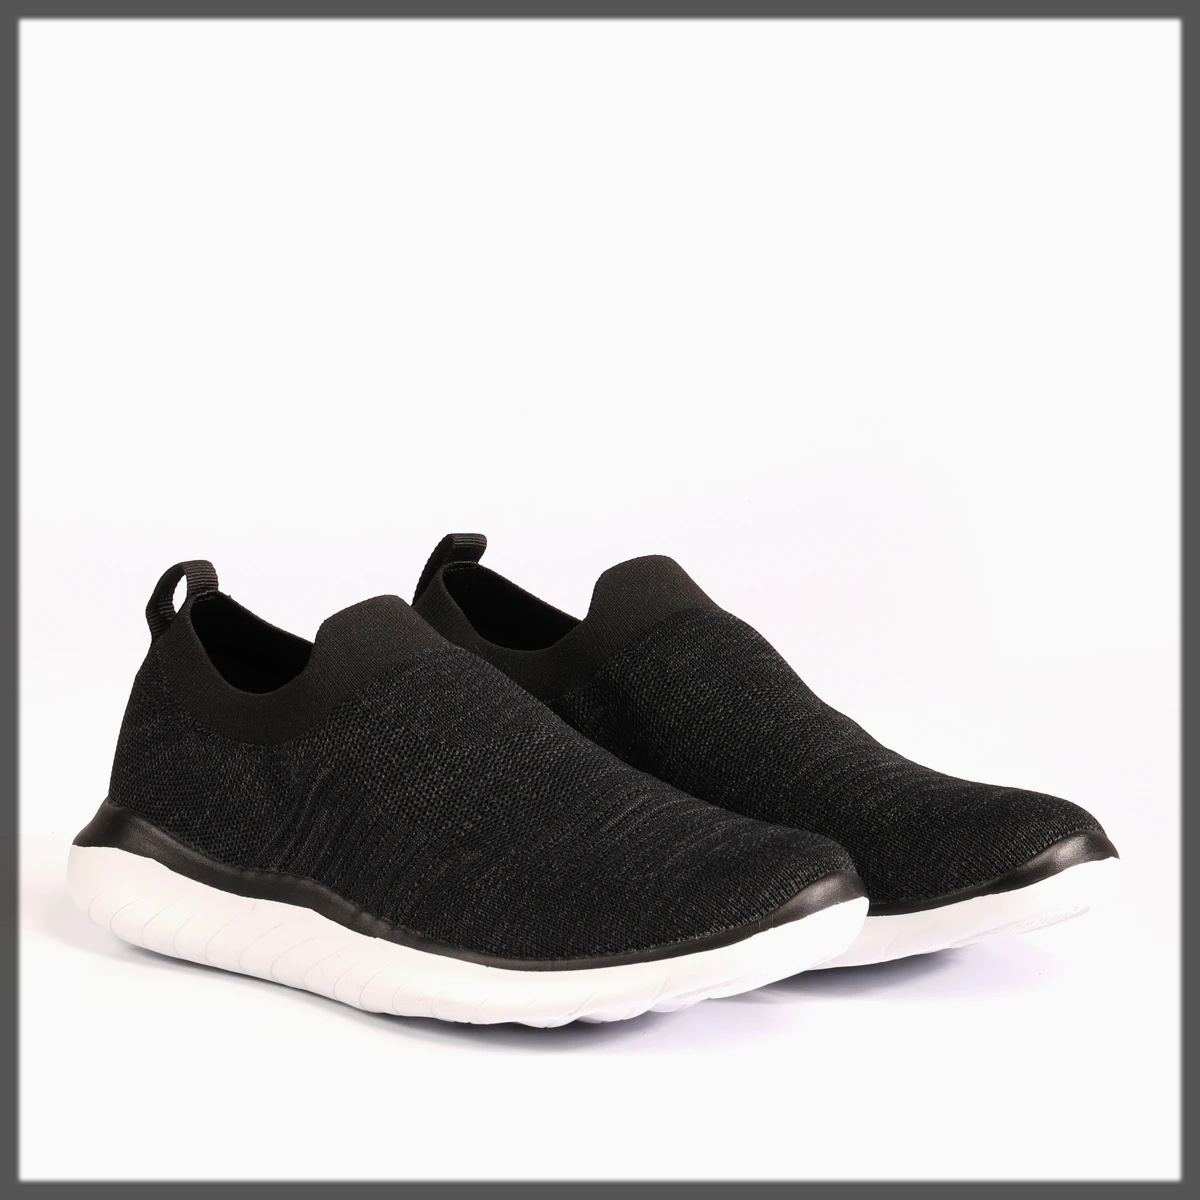 black summer shoes by hush puppies